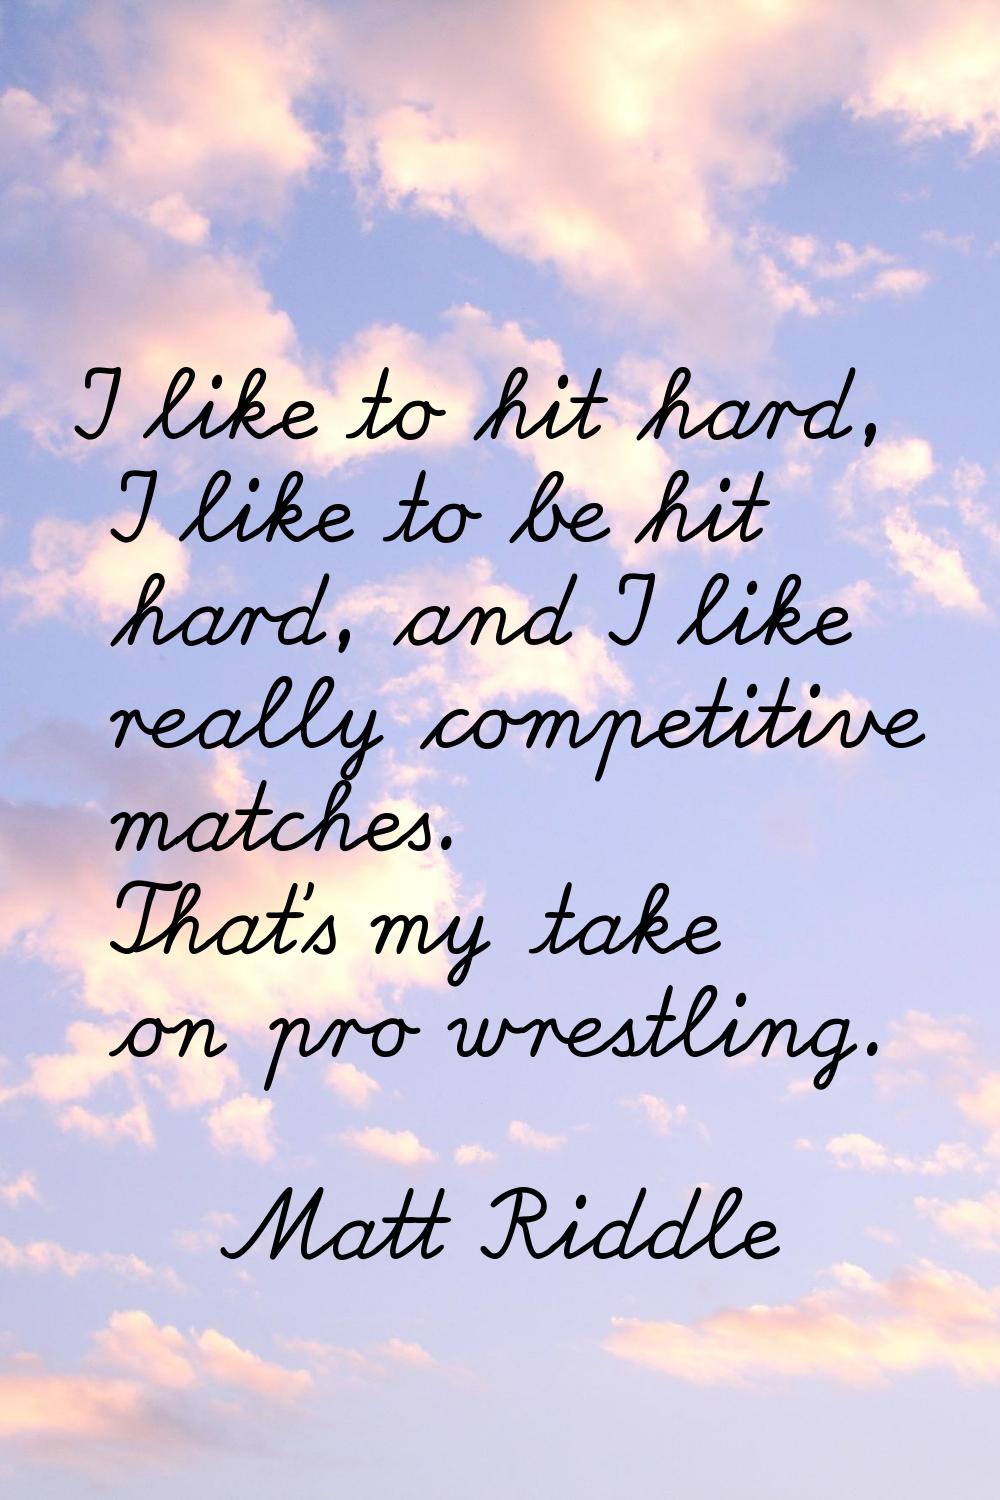 I like to hit hard, I like to be hit hard, and I like really competitive matches. That's my take on